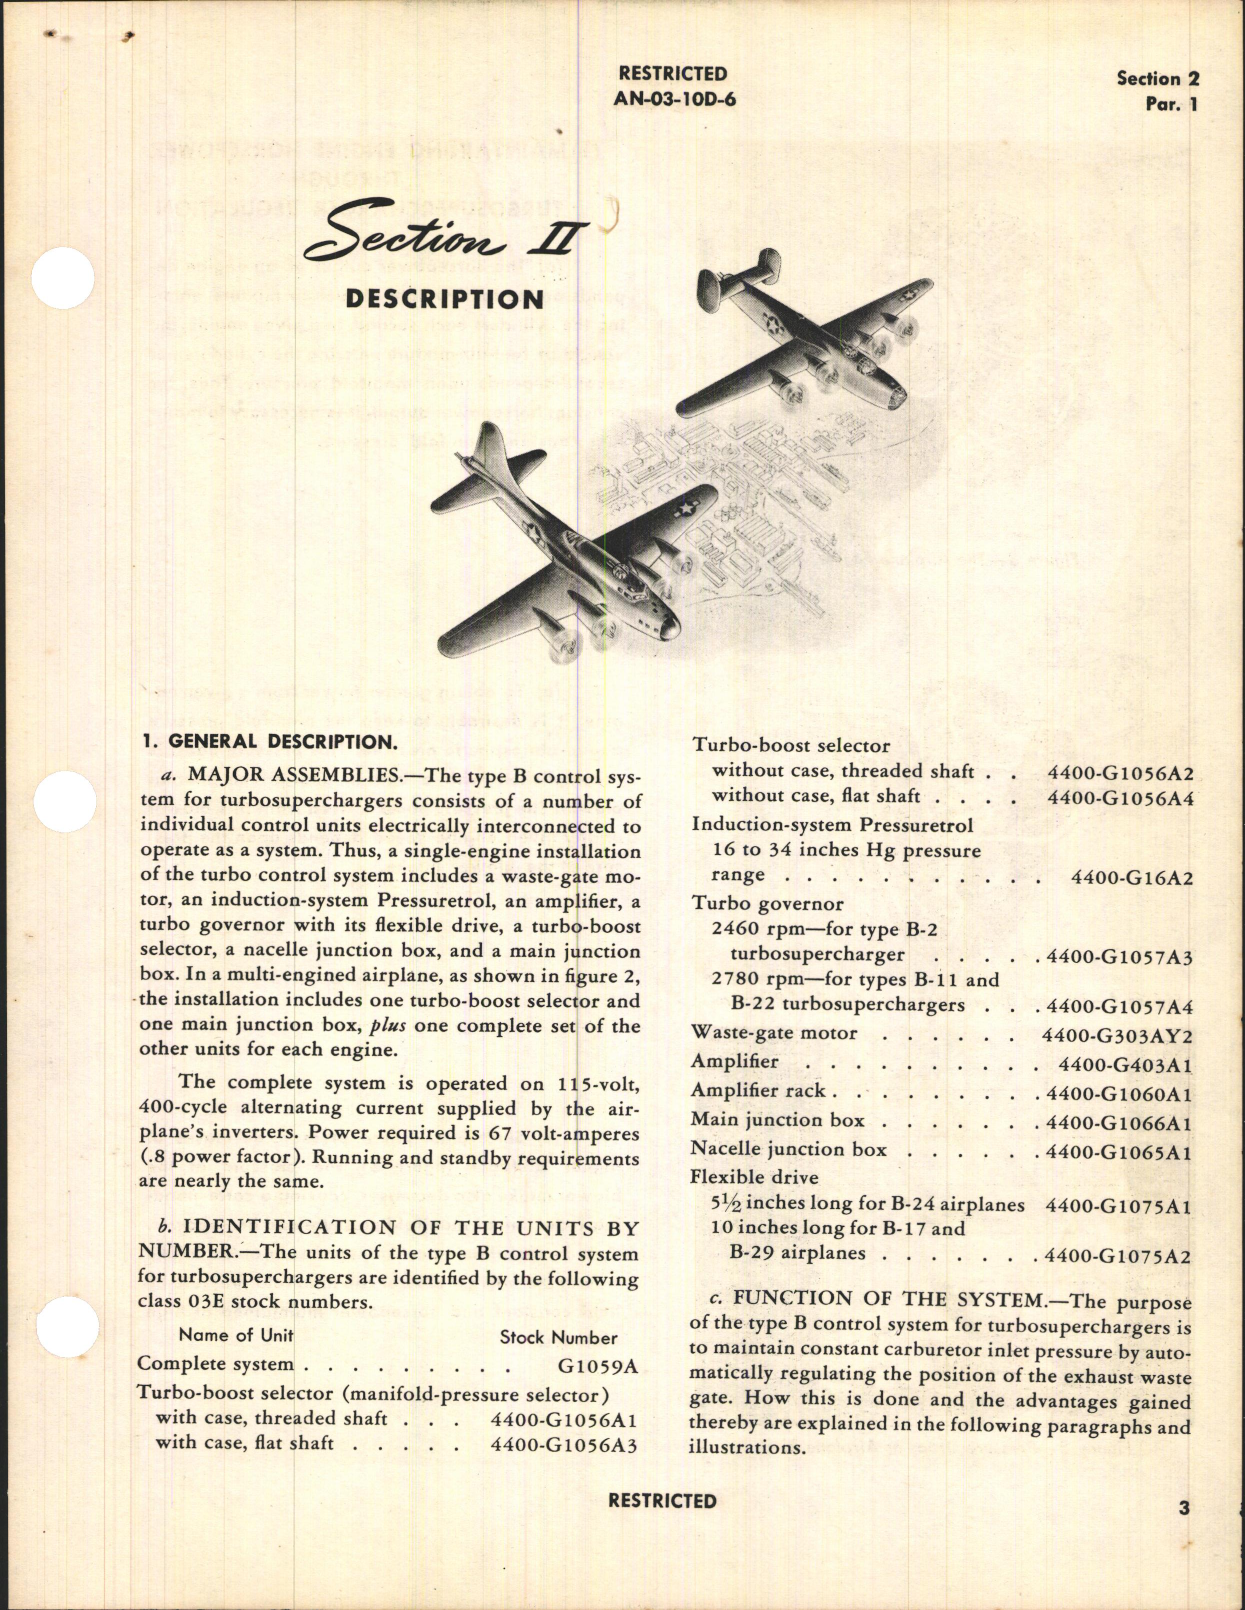 Sample page 7 from AirCorps Library document: Operation and Service Instructions for Type B Electronic Control System for Turbosuperchargers